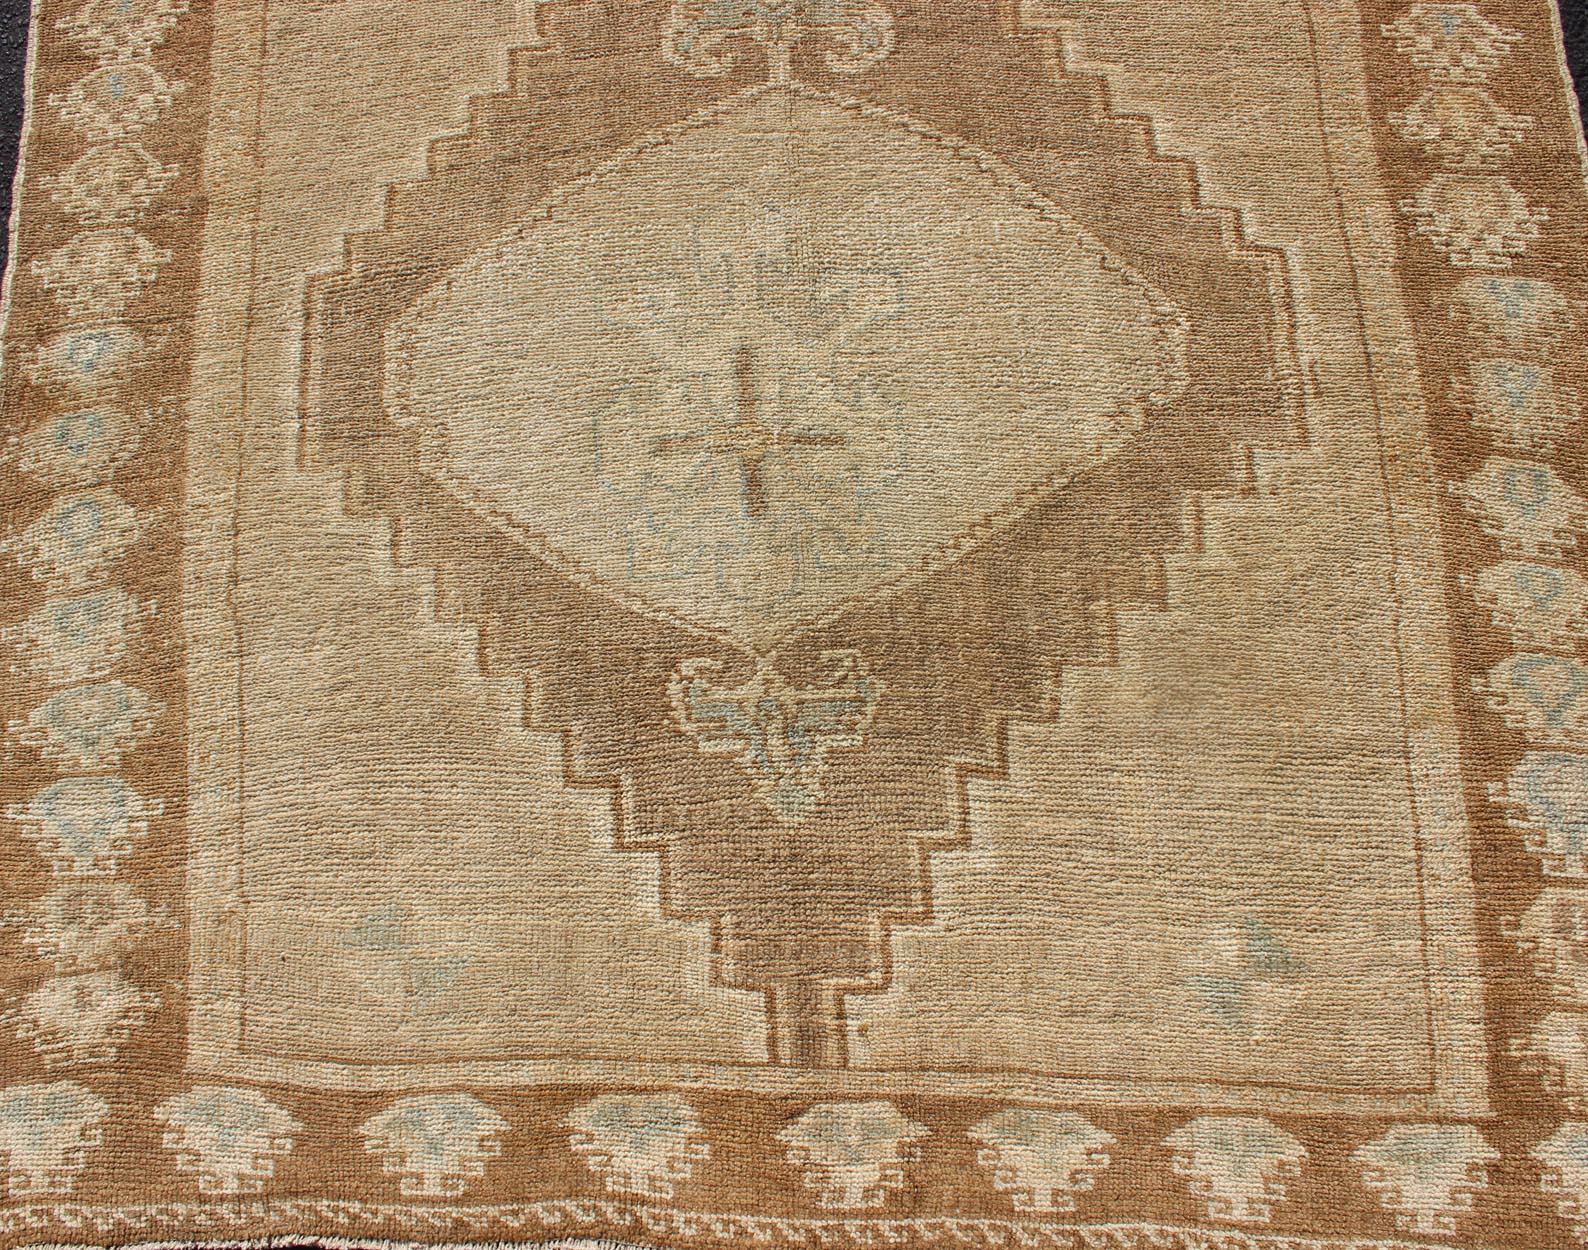 Large Gallery Turkish Rug in Earth Tones, Light Brown with Three Medallions For Sale 2